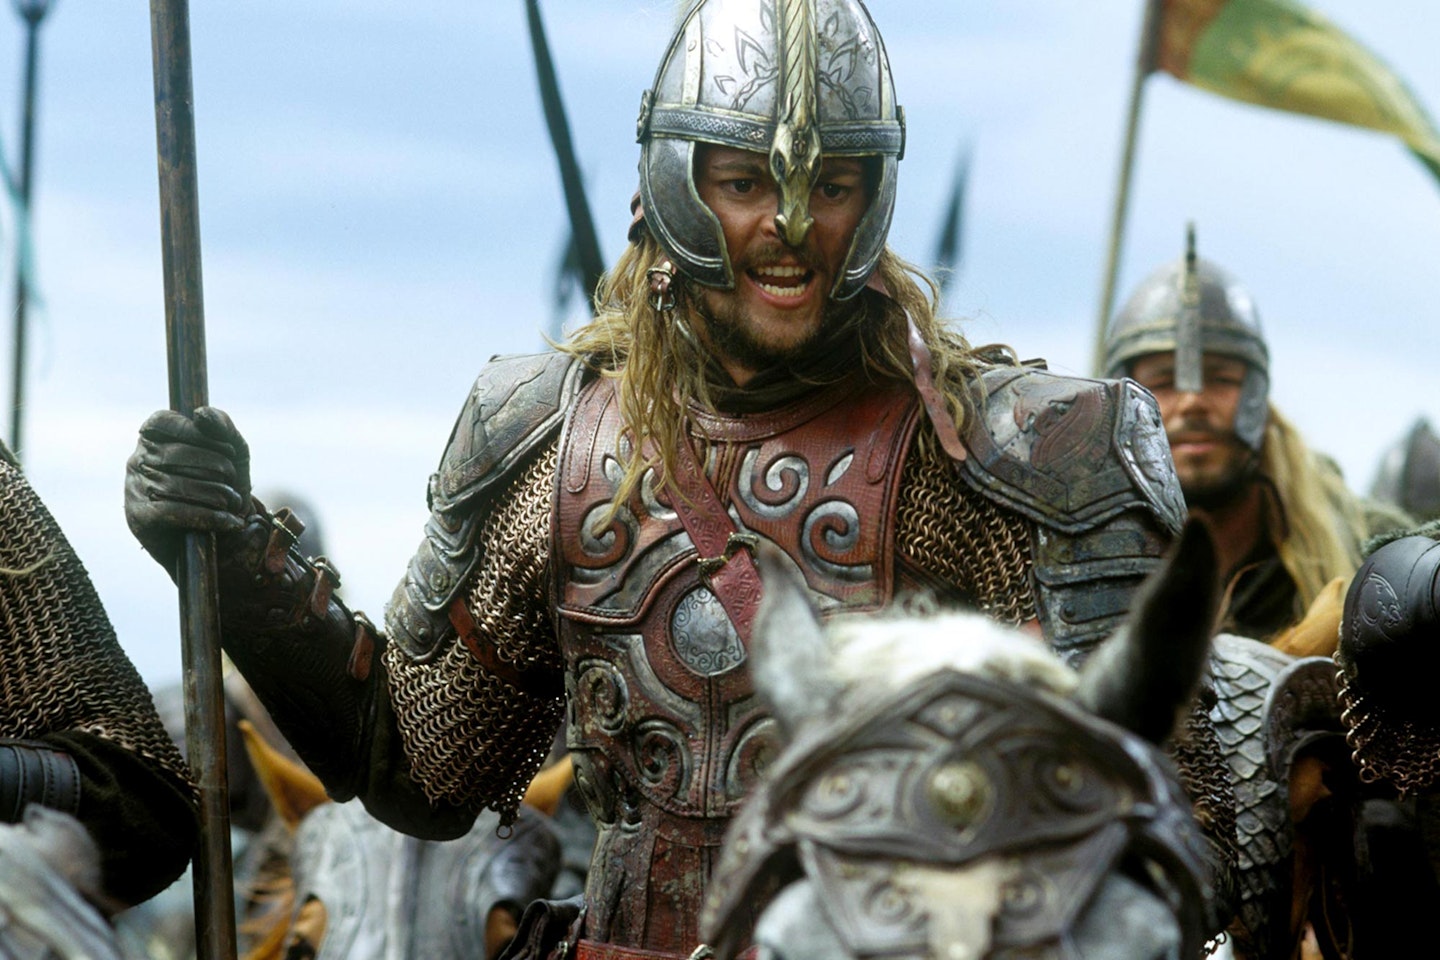 The Lord of the Rings: The War of the Rohirrim': Everything We Know So Far